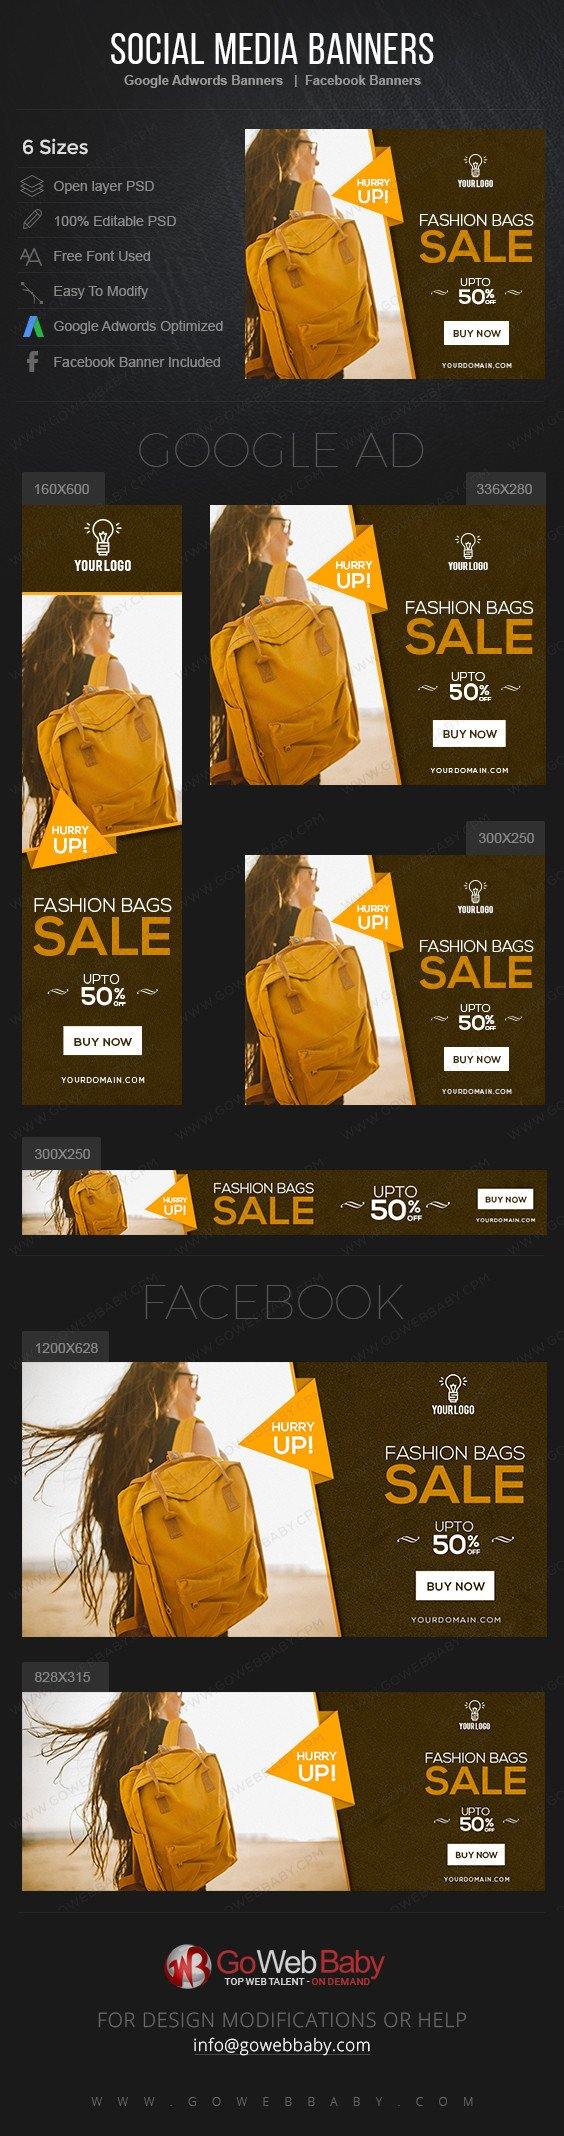 Google Adwords Display Banner With Facebook Banners - Fashion Bags For Website Marketing - GoWebBaby.Com